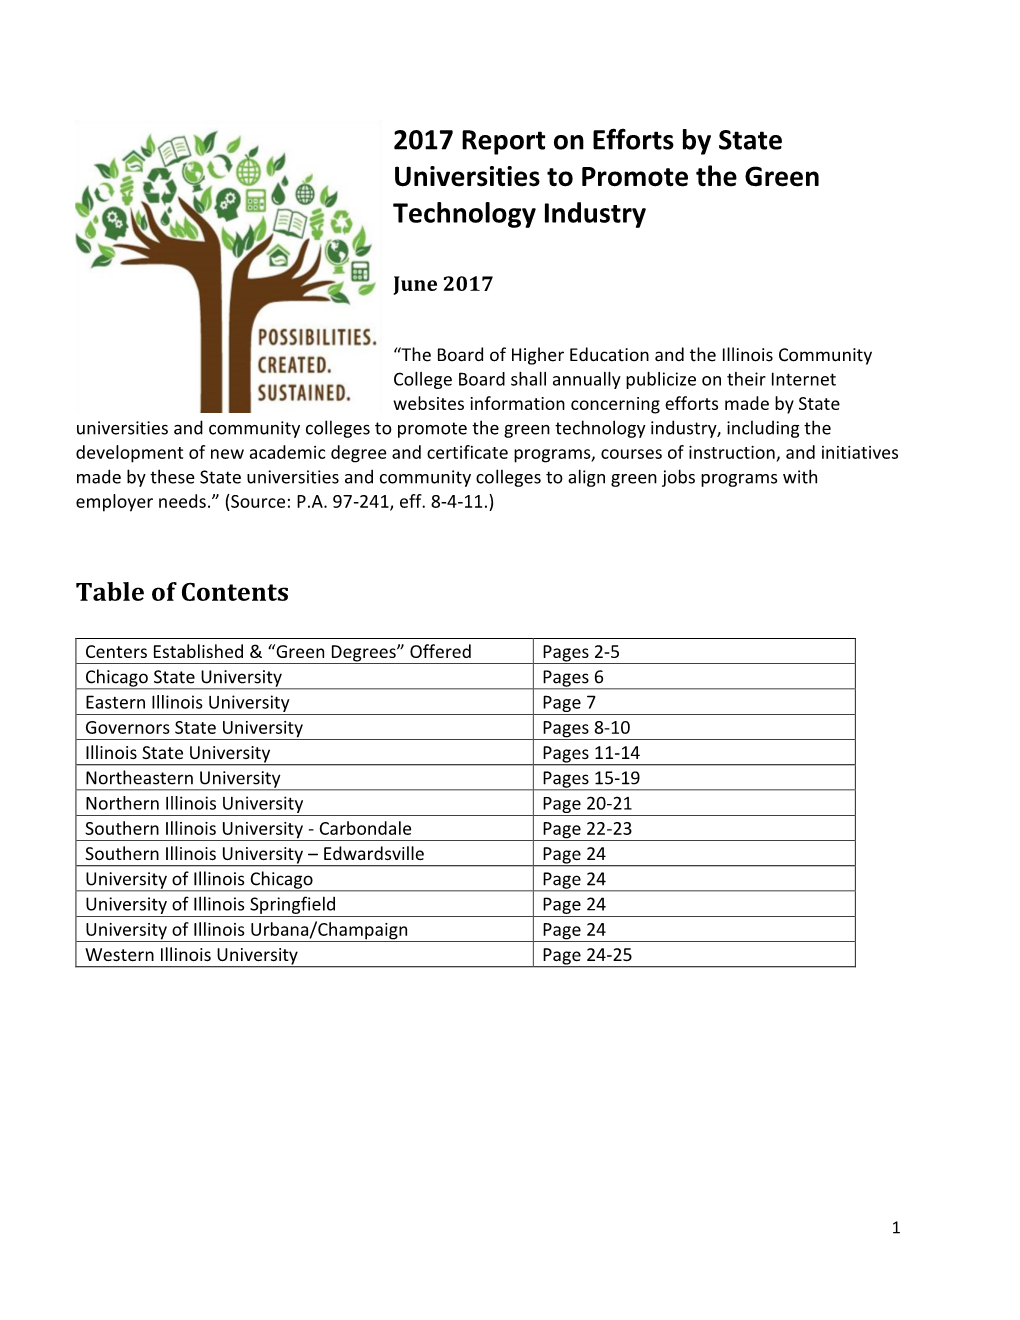 2017 Report on Efforts by State Universities to Promote the Green Technology Industry